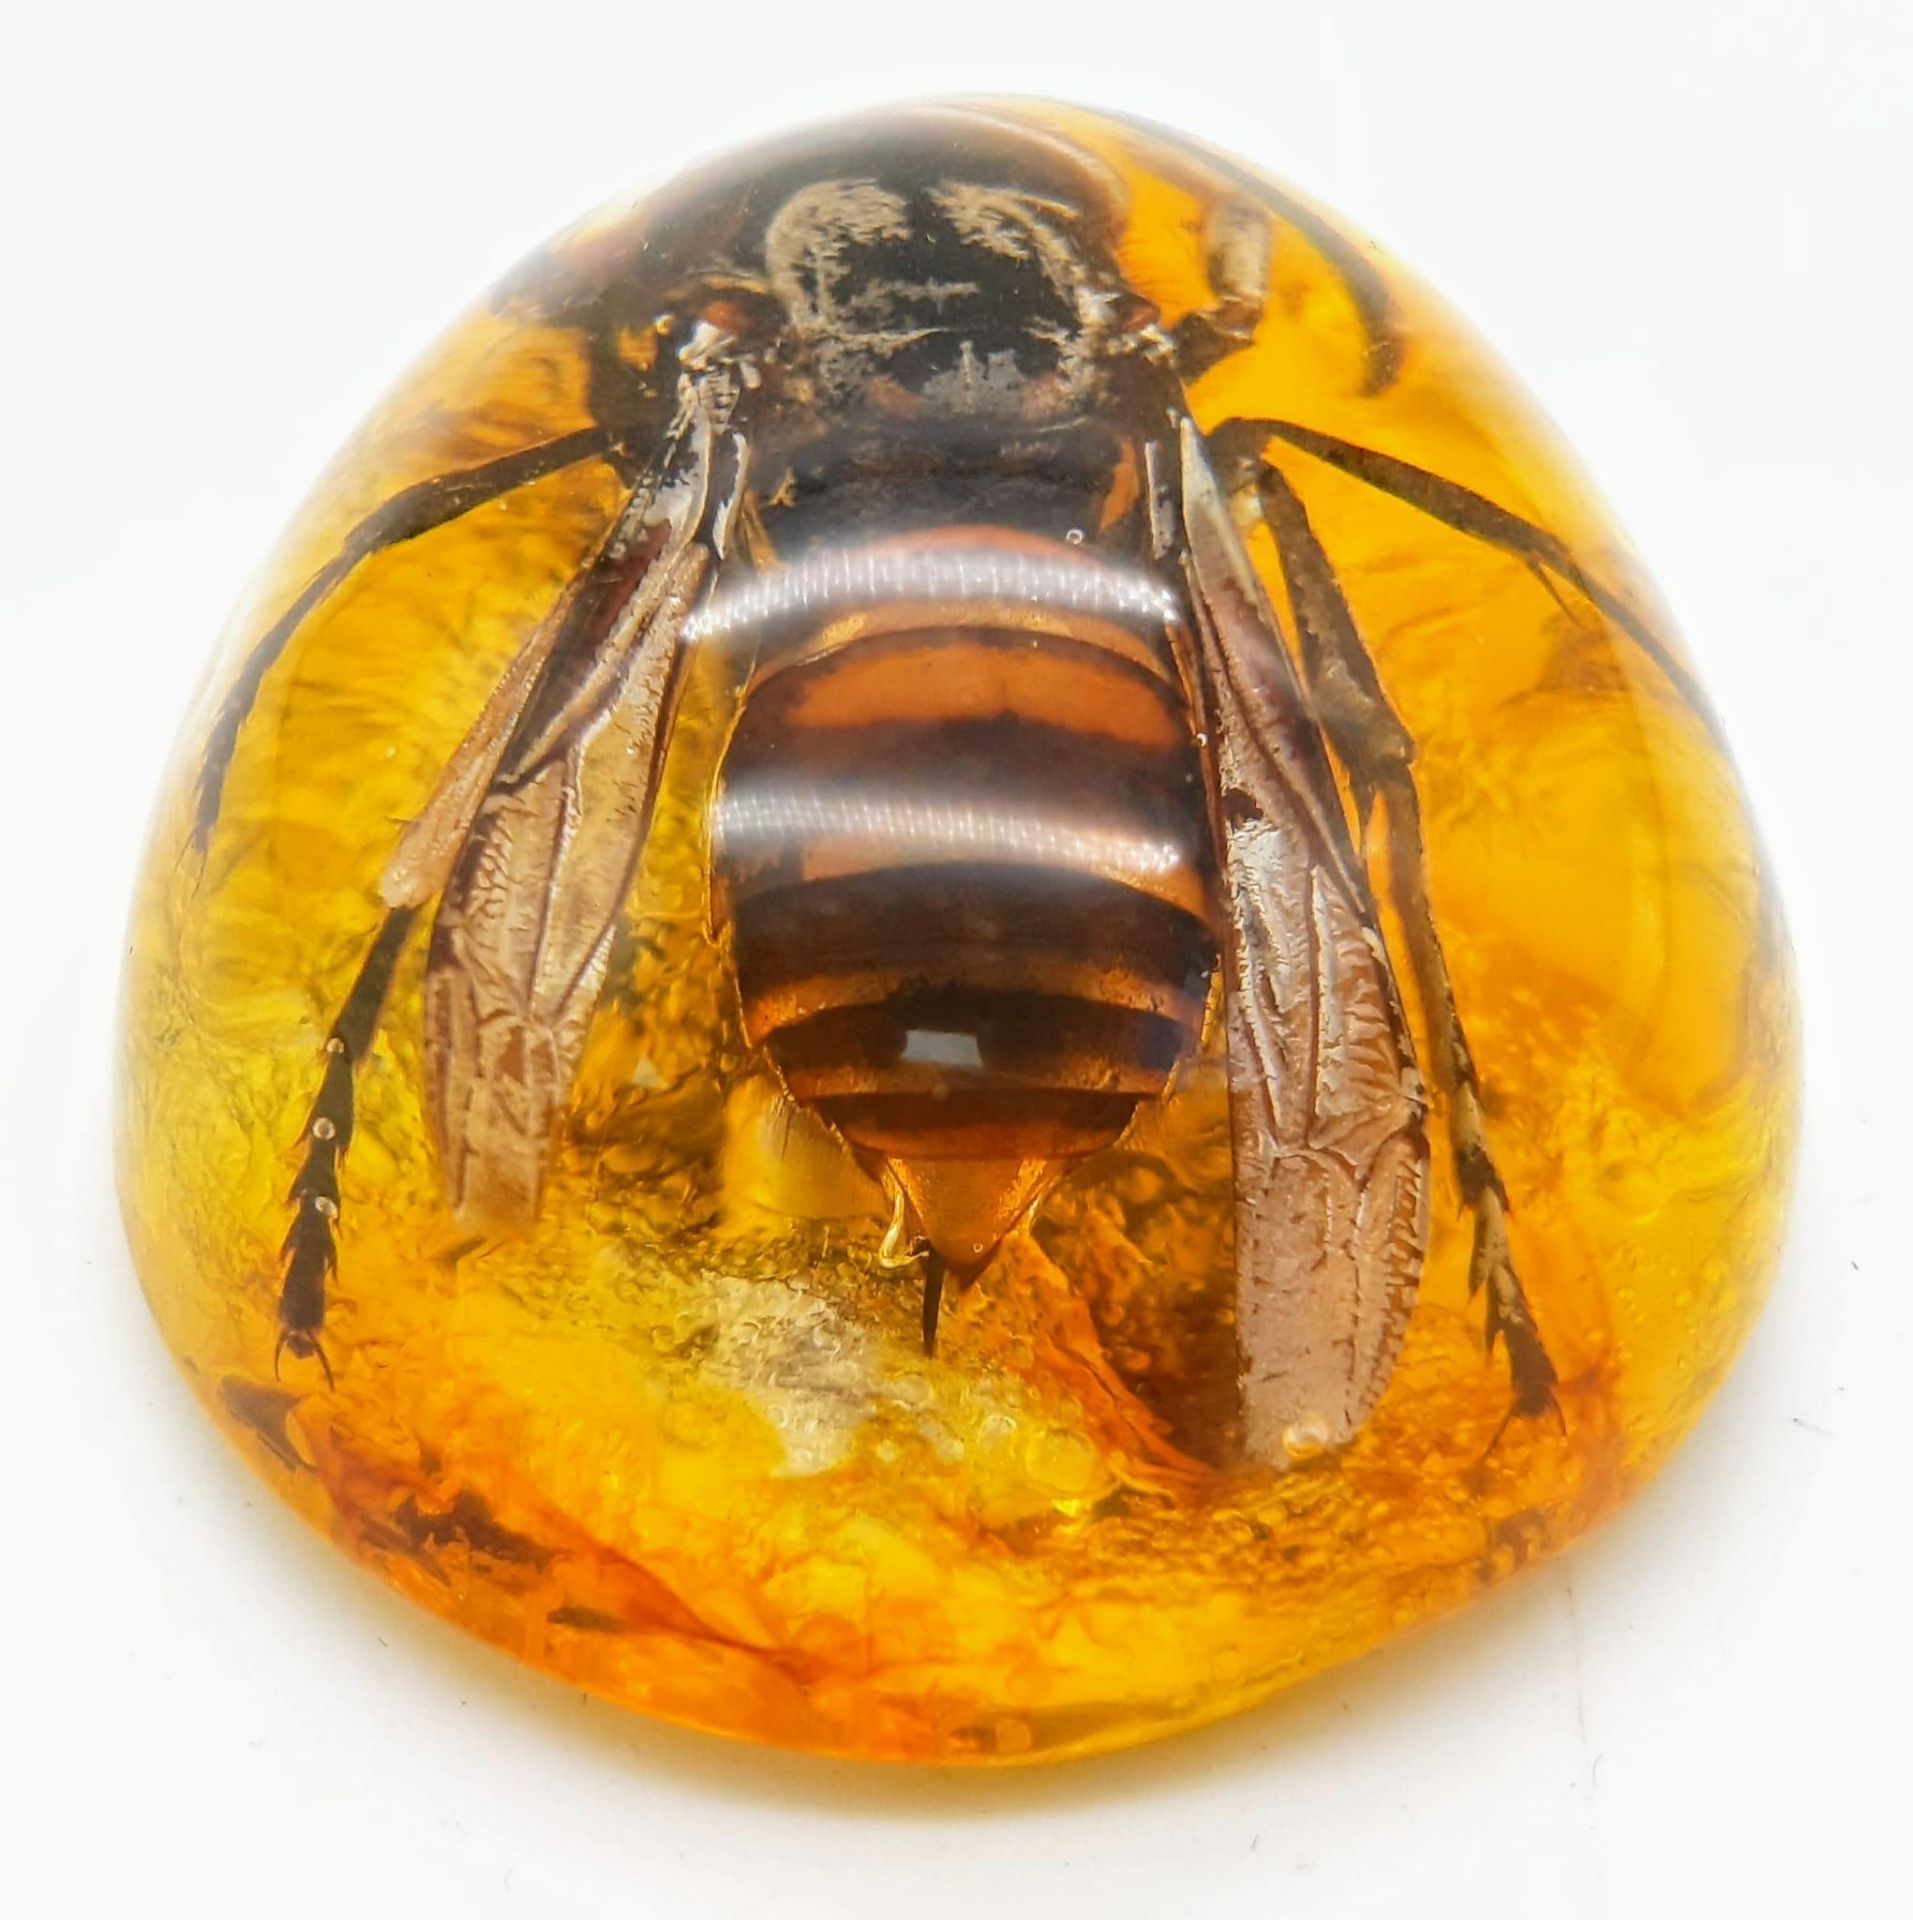 A Humongous Asian Hornet in Amber Resin - Pendant or Paperweight. 6cm - Bild 4 aus 4